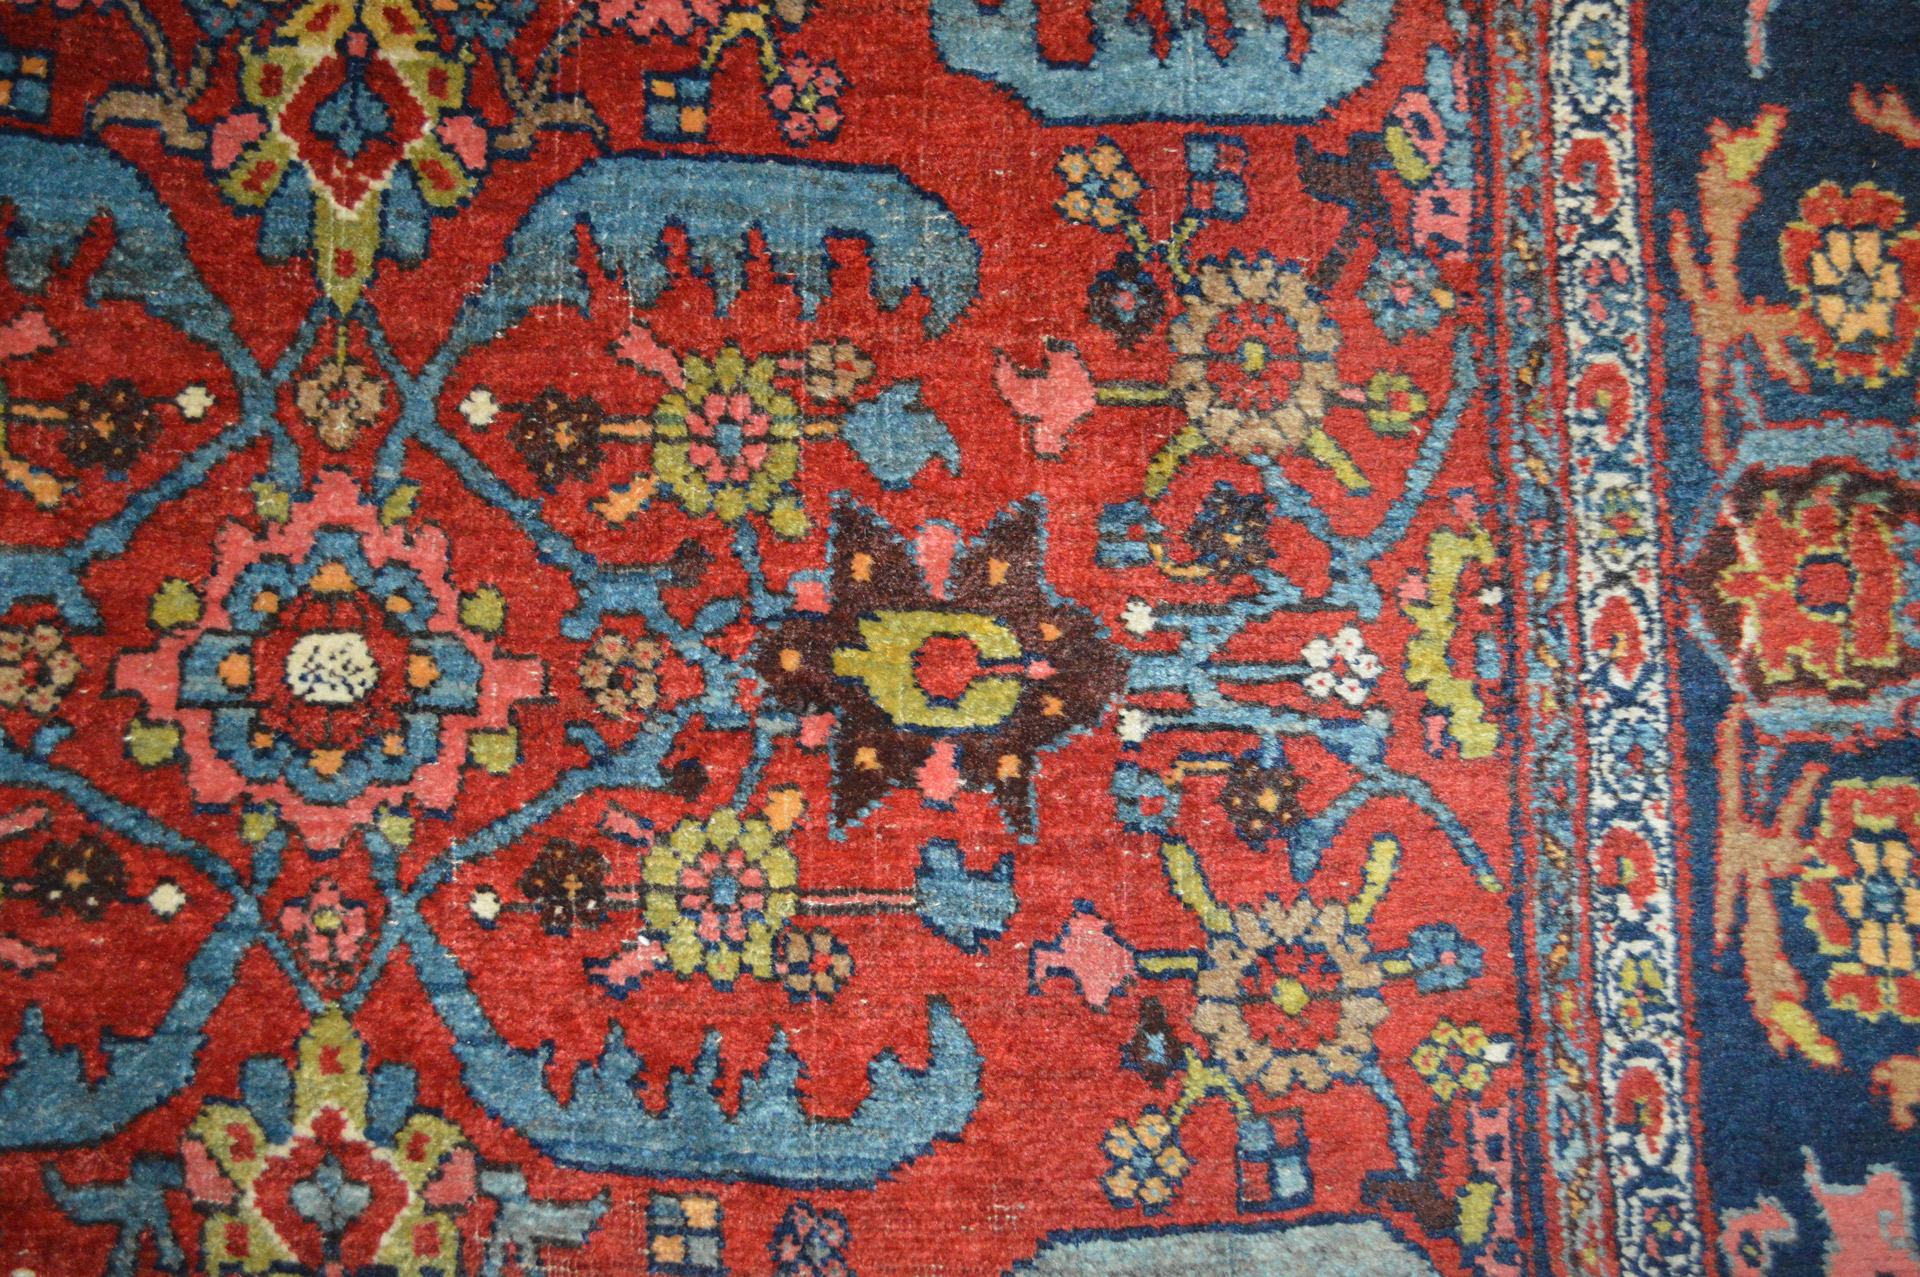 Detail of stylized leaves and flowers on a red field in an antique Persian Bidjar carpet - Douglas Stock Gallery, antique and contemporary hand woven Oriental rugs Boston,MA area -Newton,Wellesley,Natick,MA, Oriental rugs